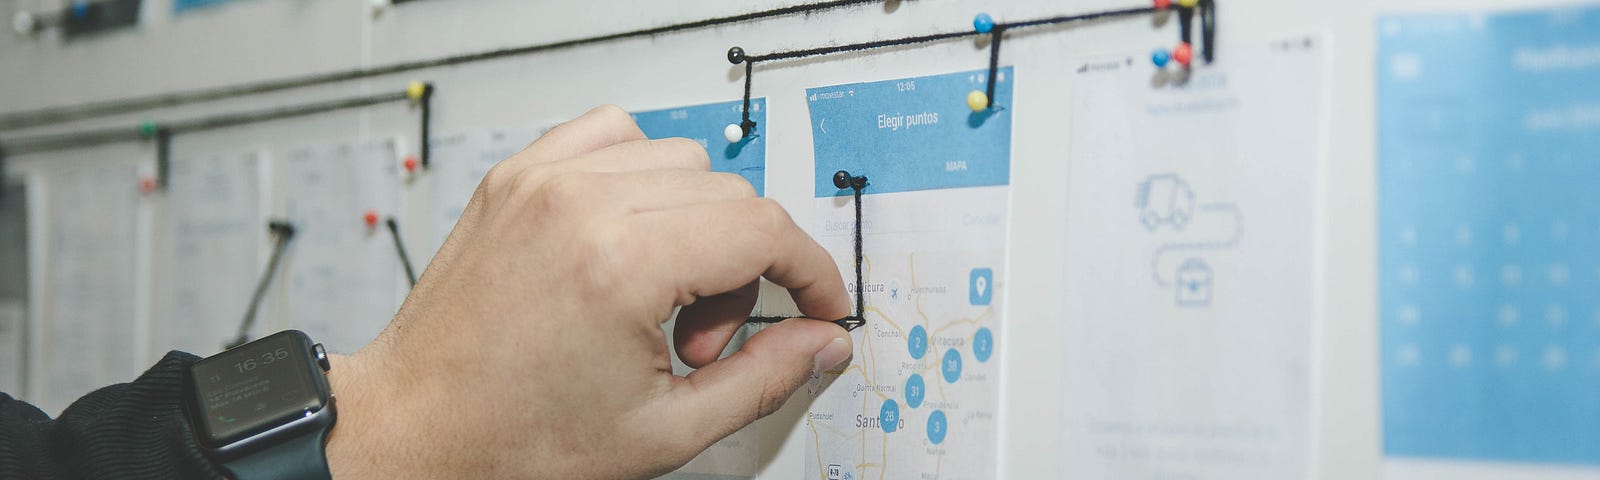 Paper screen mockups on a wall connected by bits of yarn to convey user experience flow